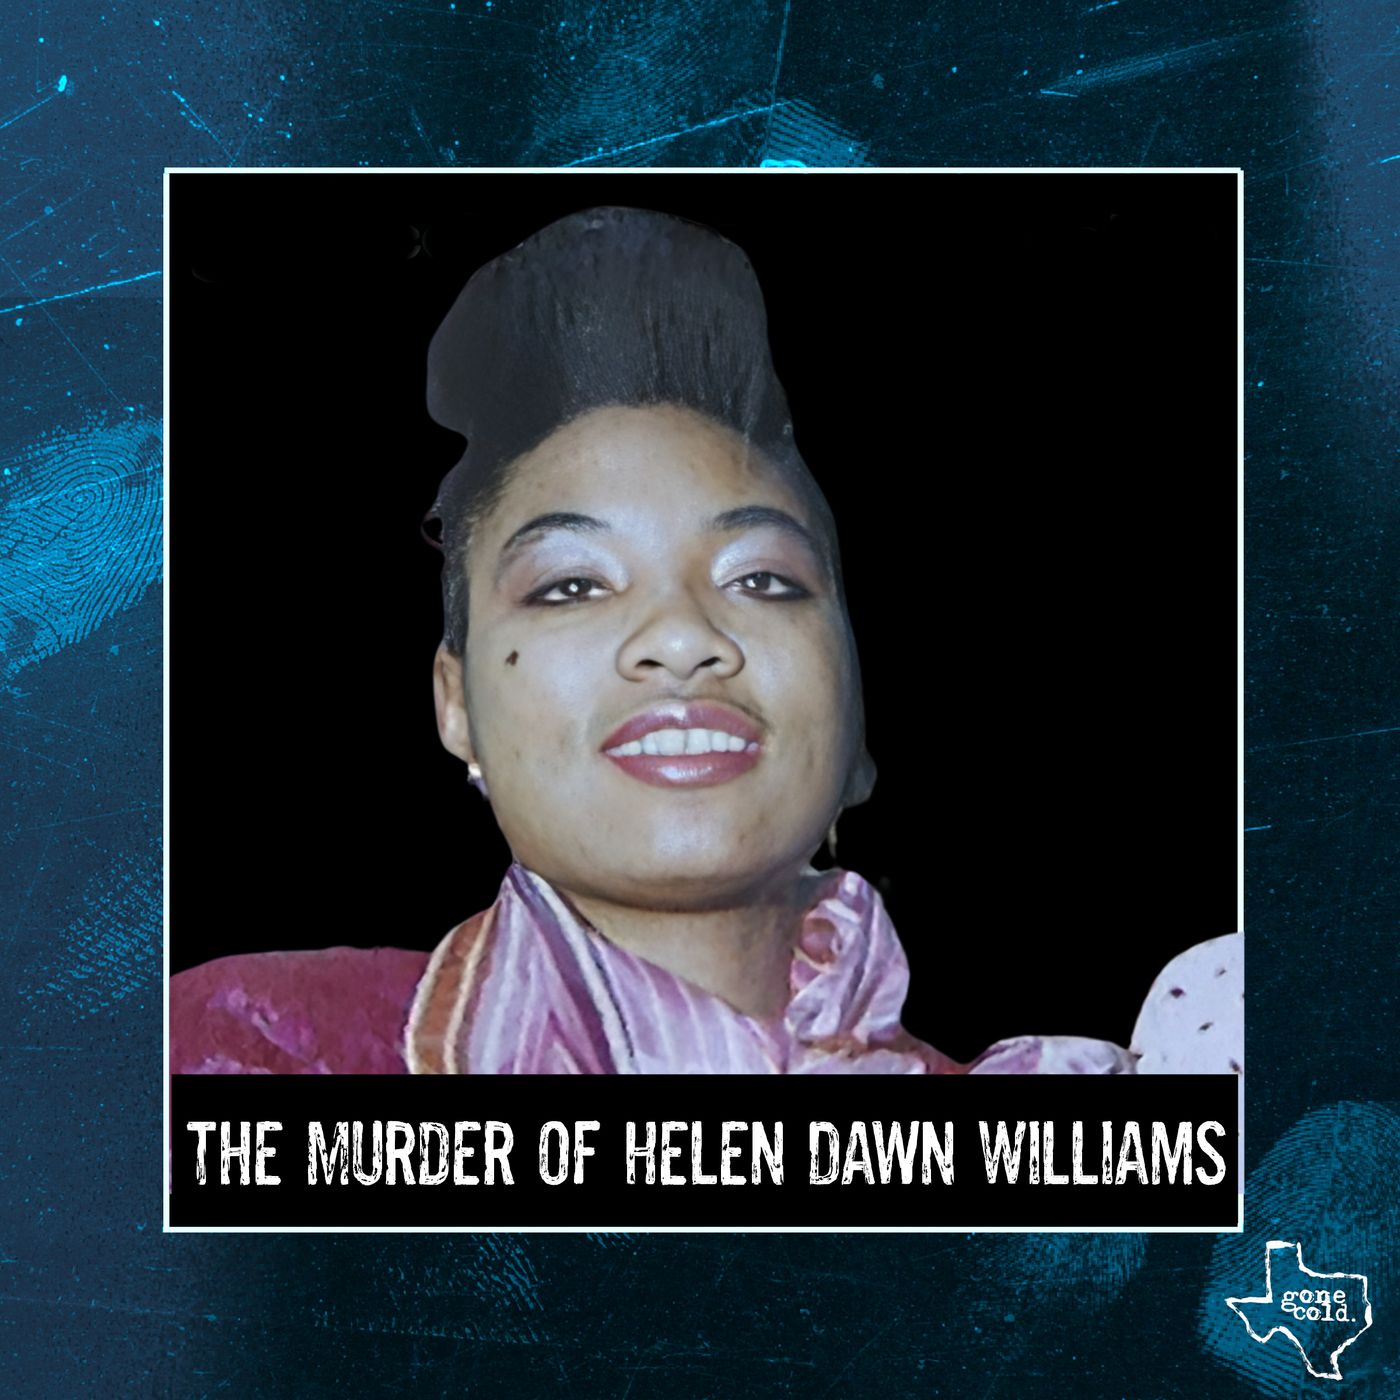 Shallow Grave: The Slaying of Helen Dawn Williams